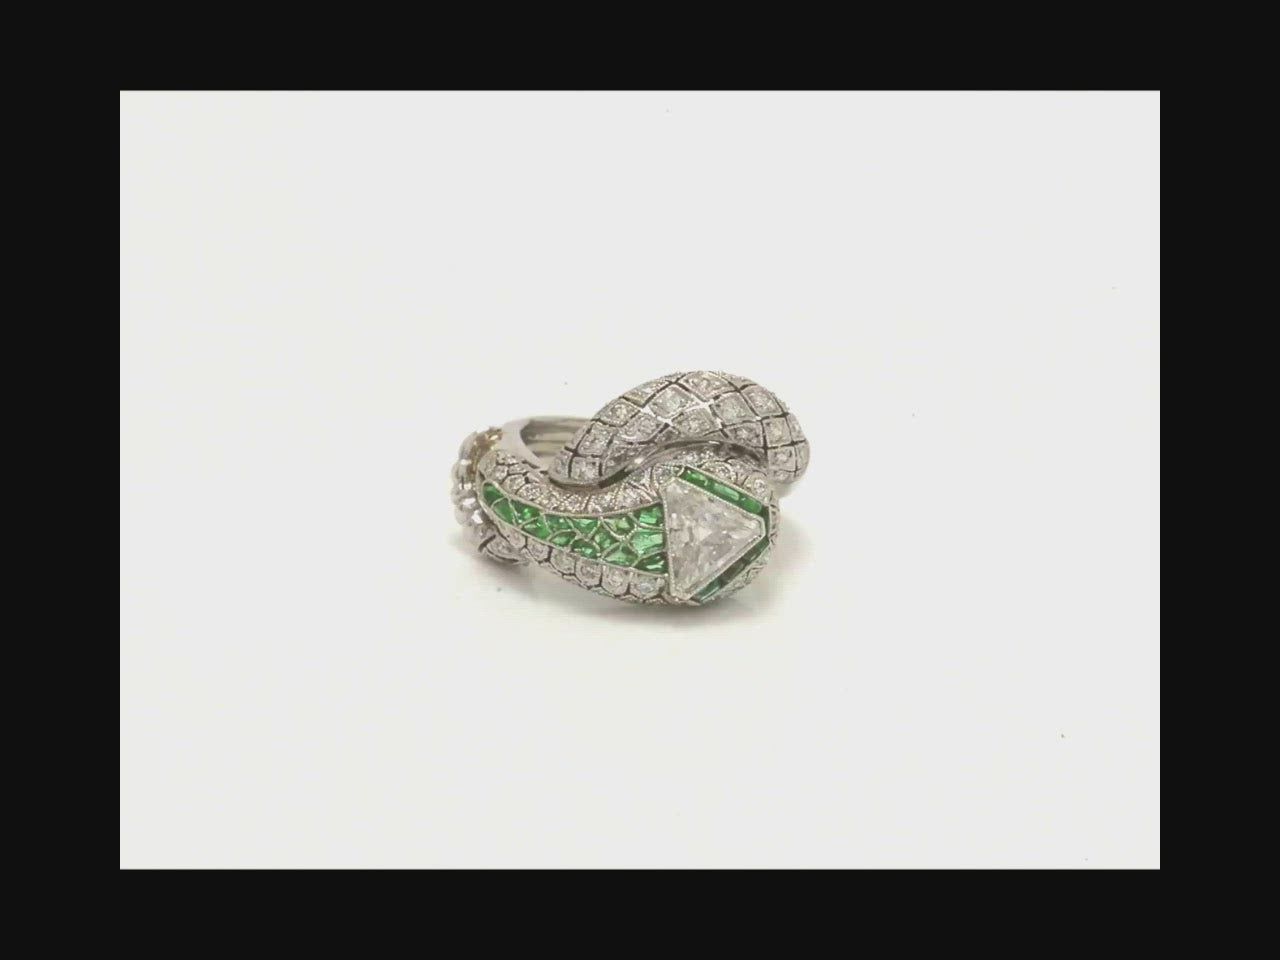 An emerald snake ring with unique triangular diamond filigree scales along its body. 